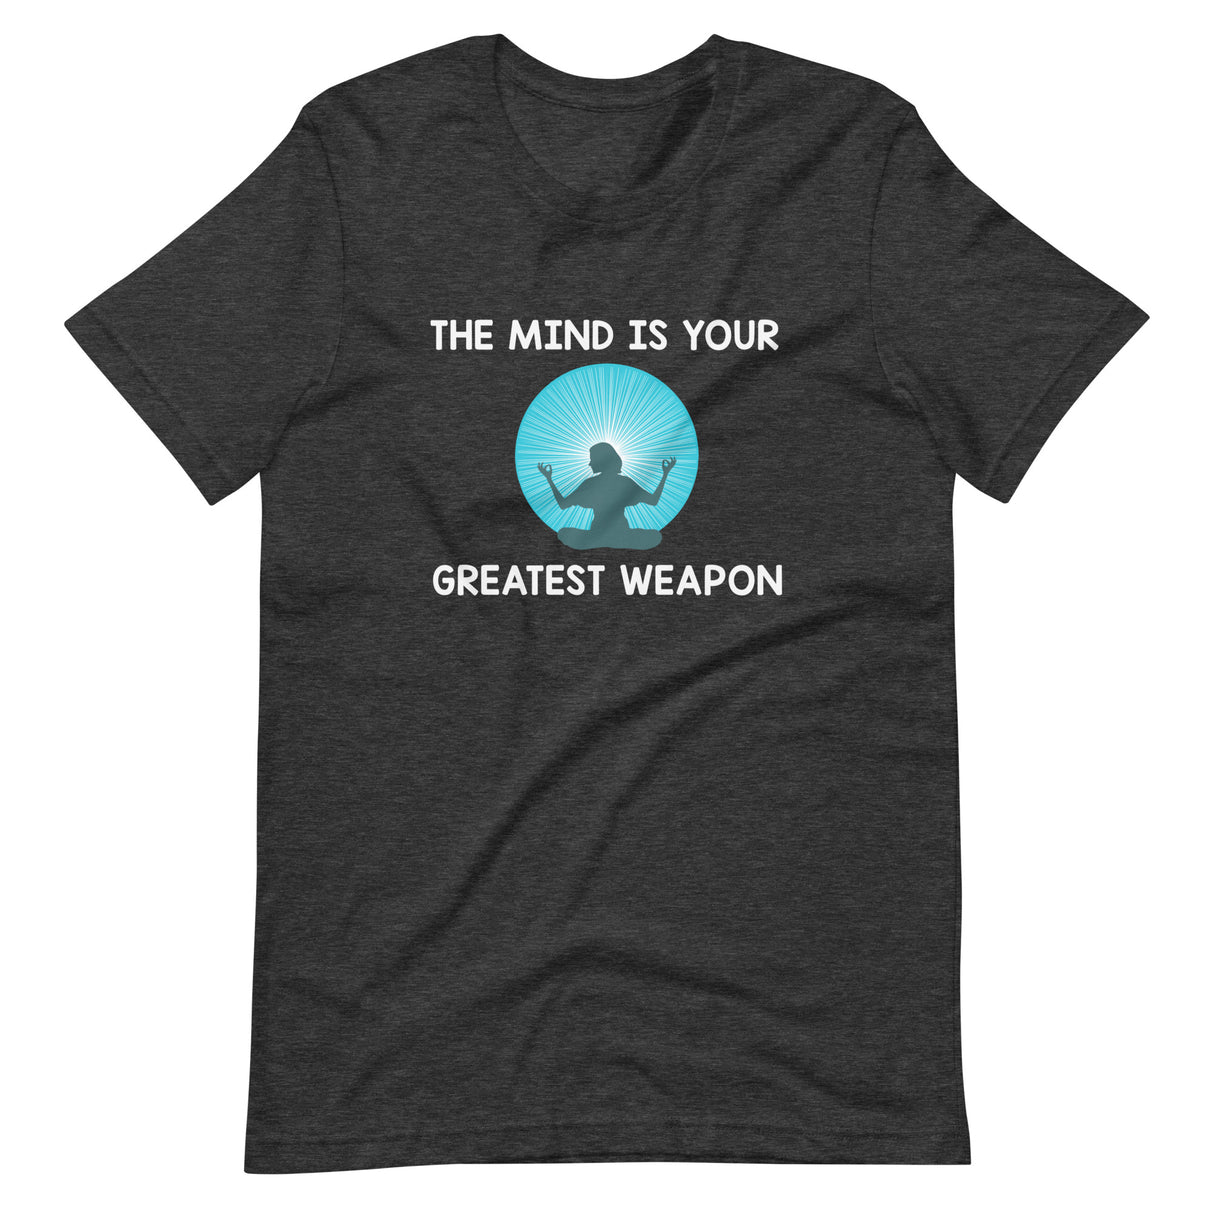 The Mind Is Your Greatest Weapon Shirt